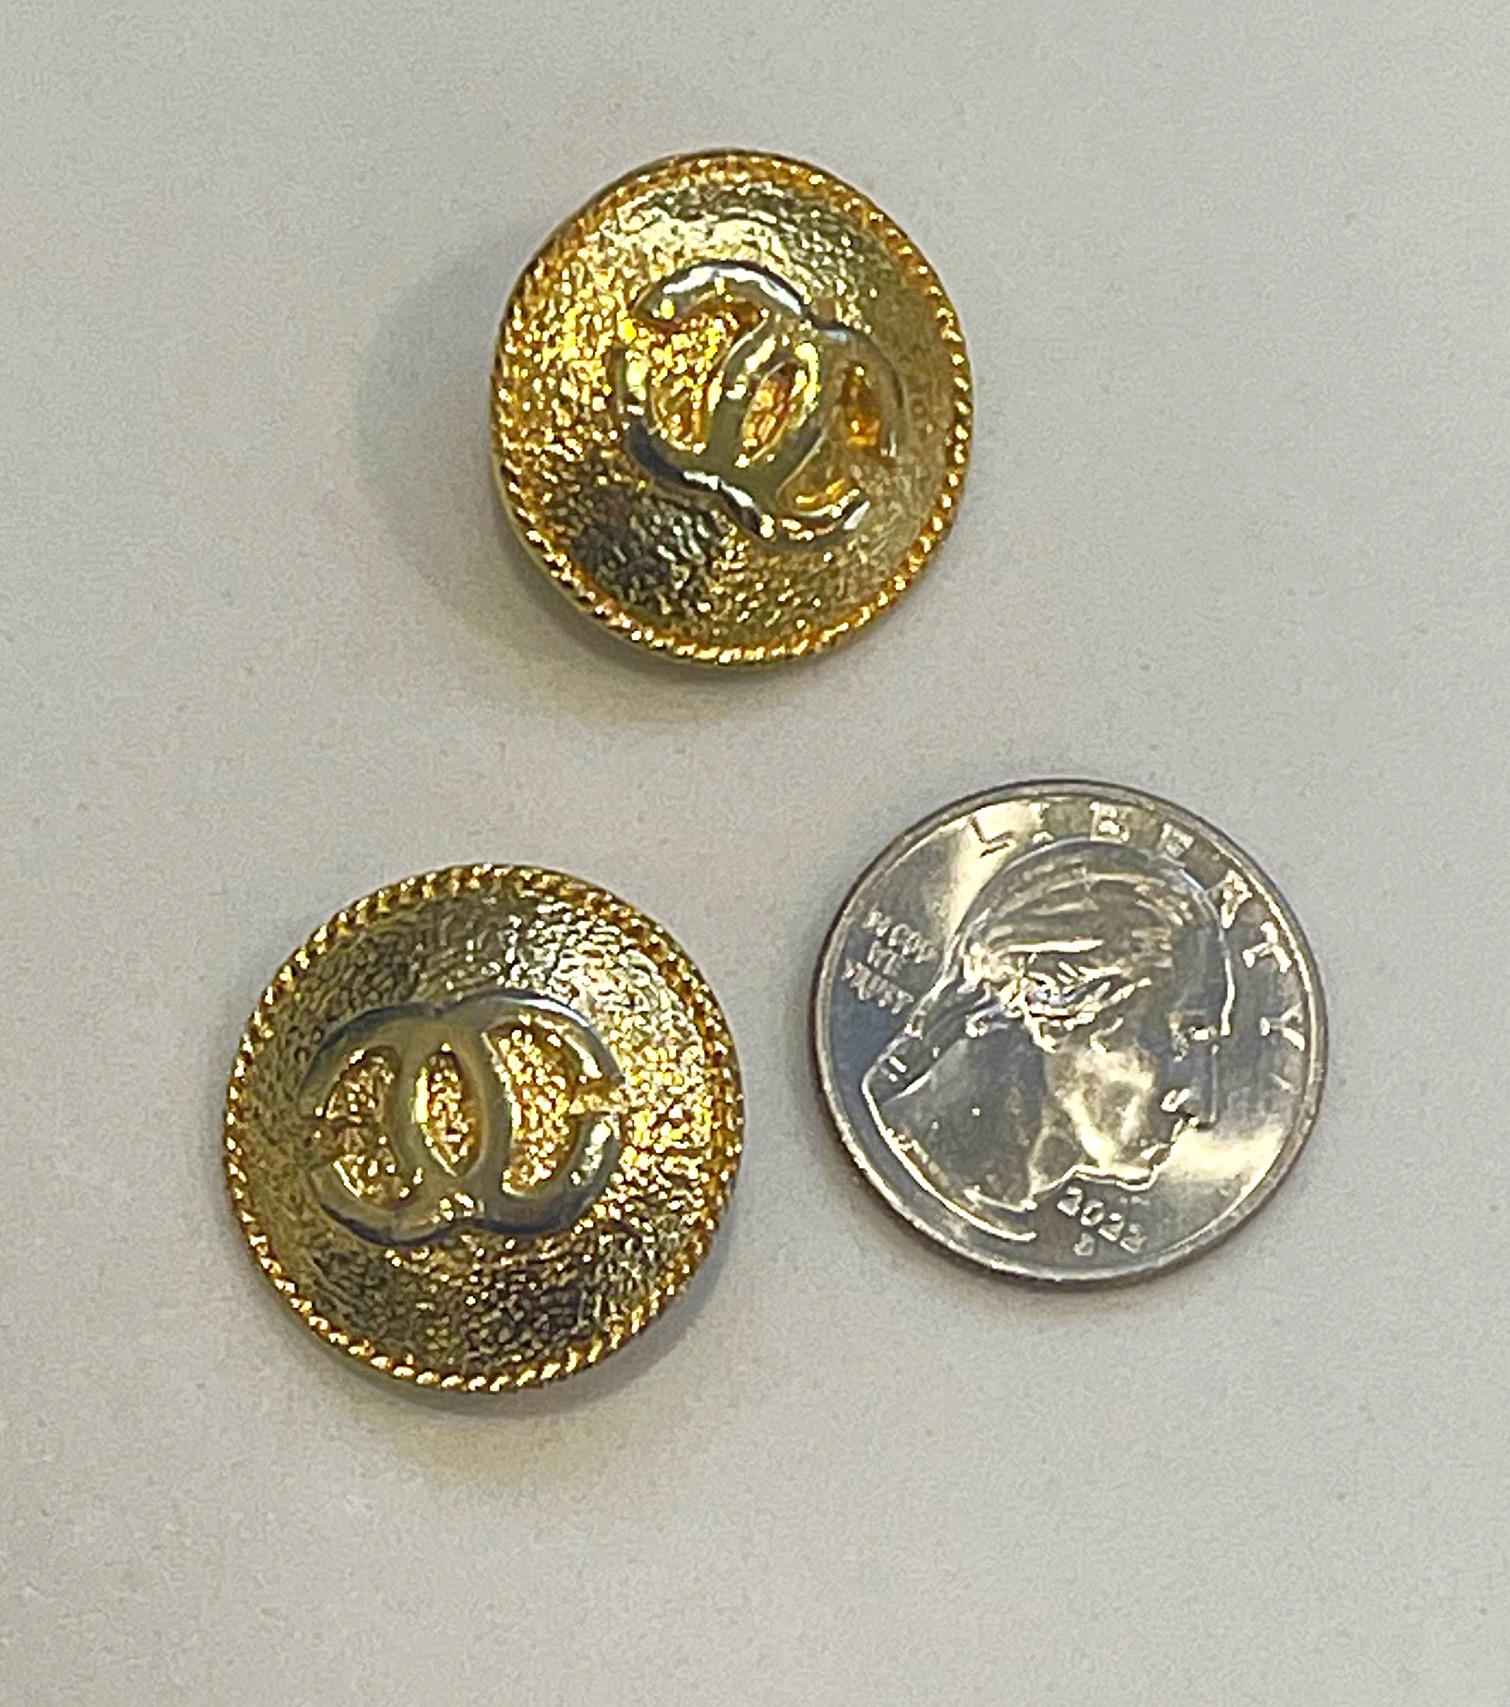 Pair of two vintage CHANEL gold tone CC logo embossed buttons. Can be used as buttons, or can easily be turned into earrings or a brooch.
In great condition 
Measures 1 inch by 1 inch